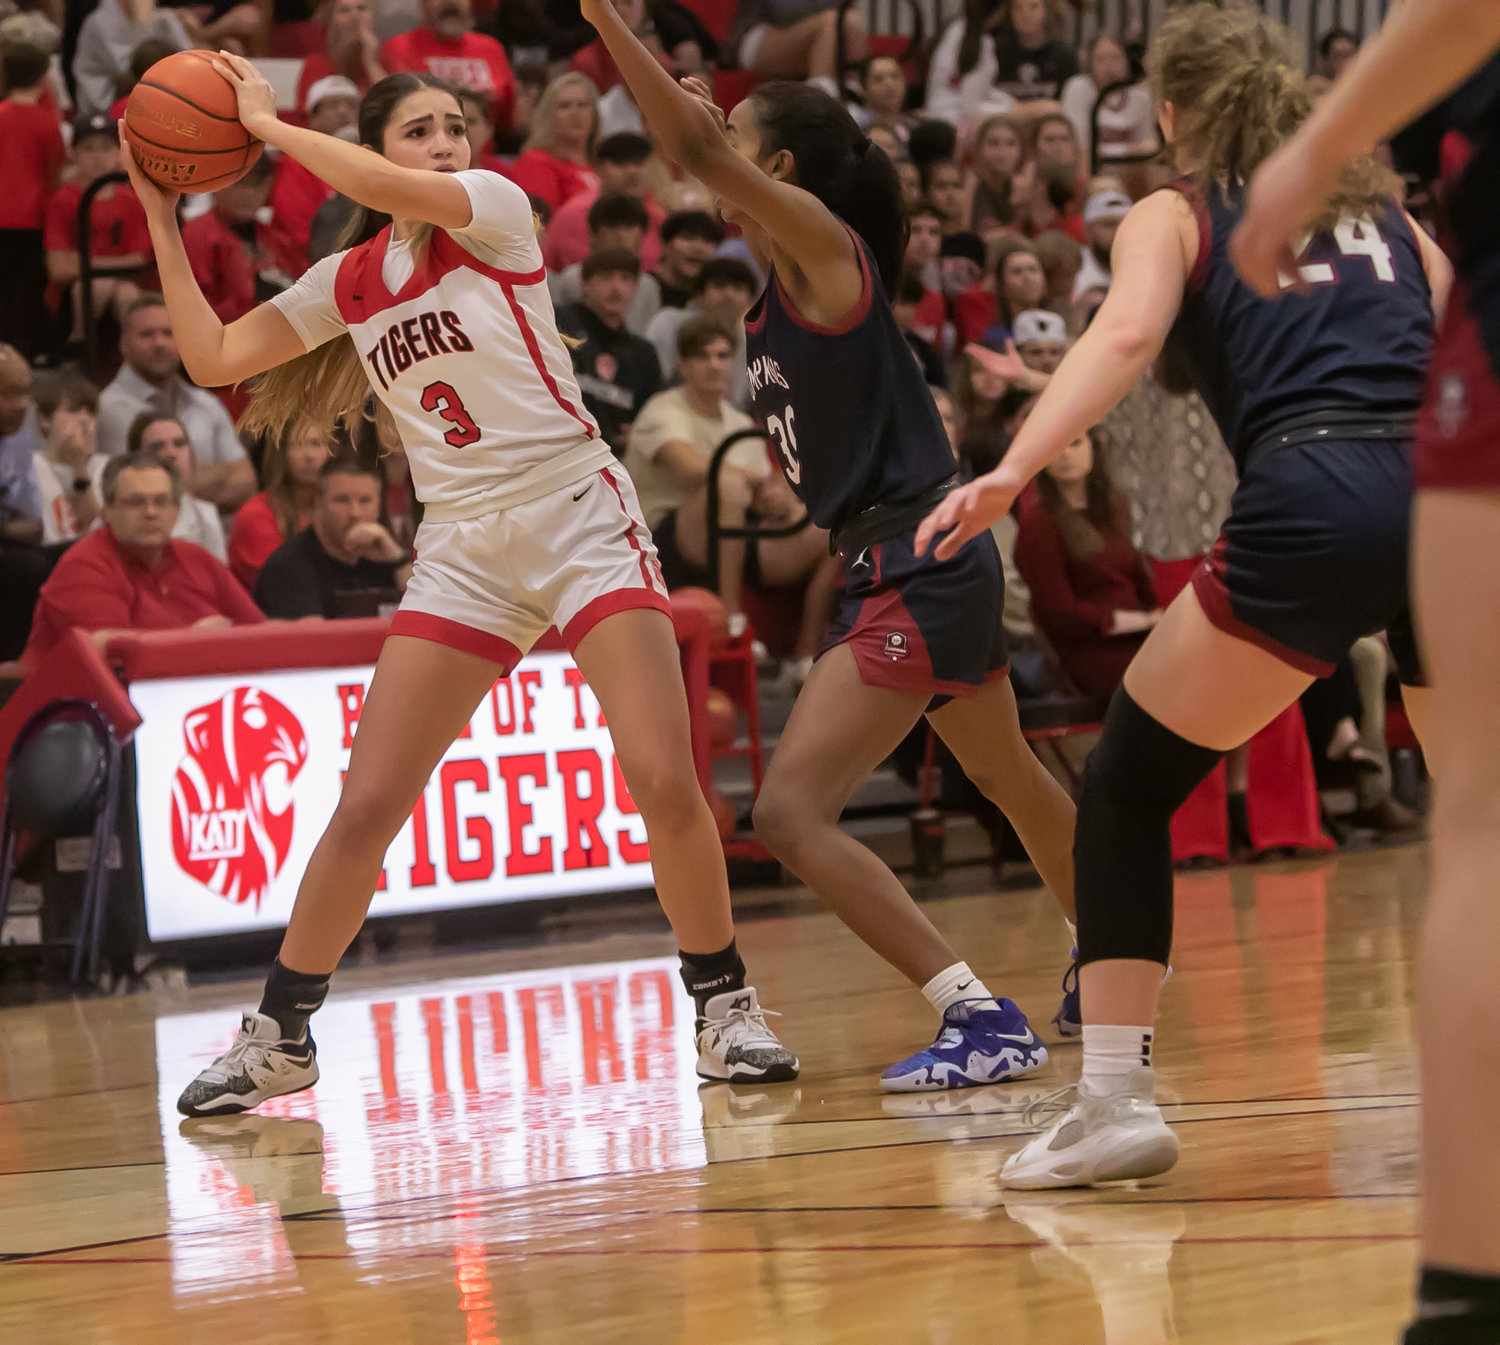 Nyla Wold looks to pass the ball during Tuesday's game between Katy and Tompkins at the Katy gym.